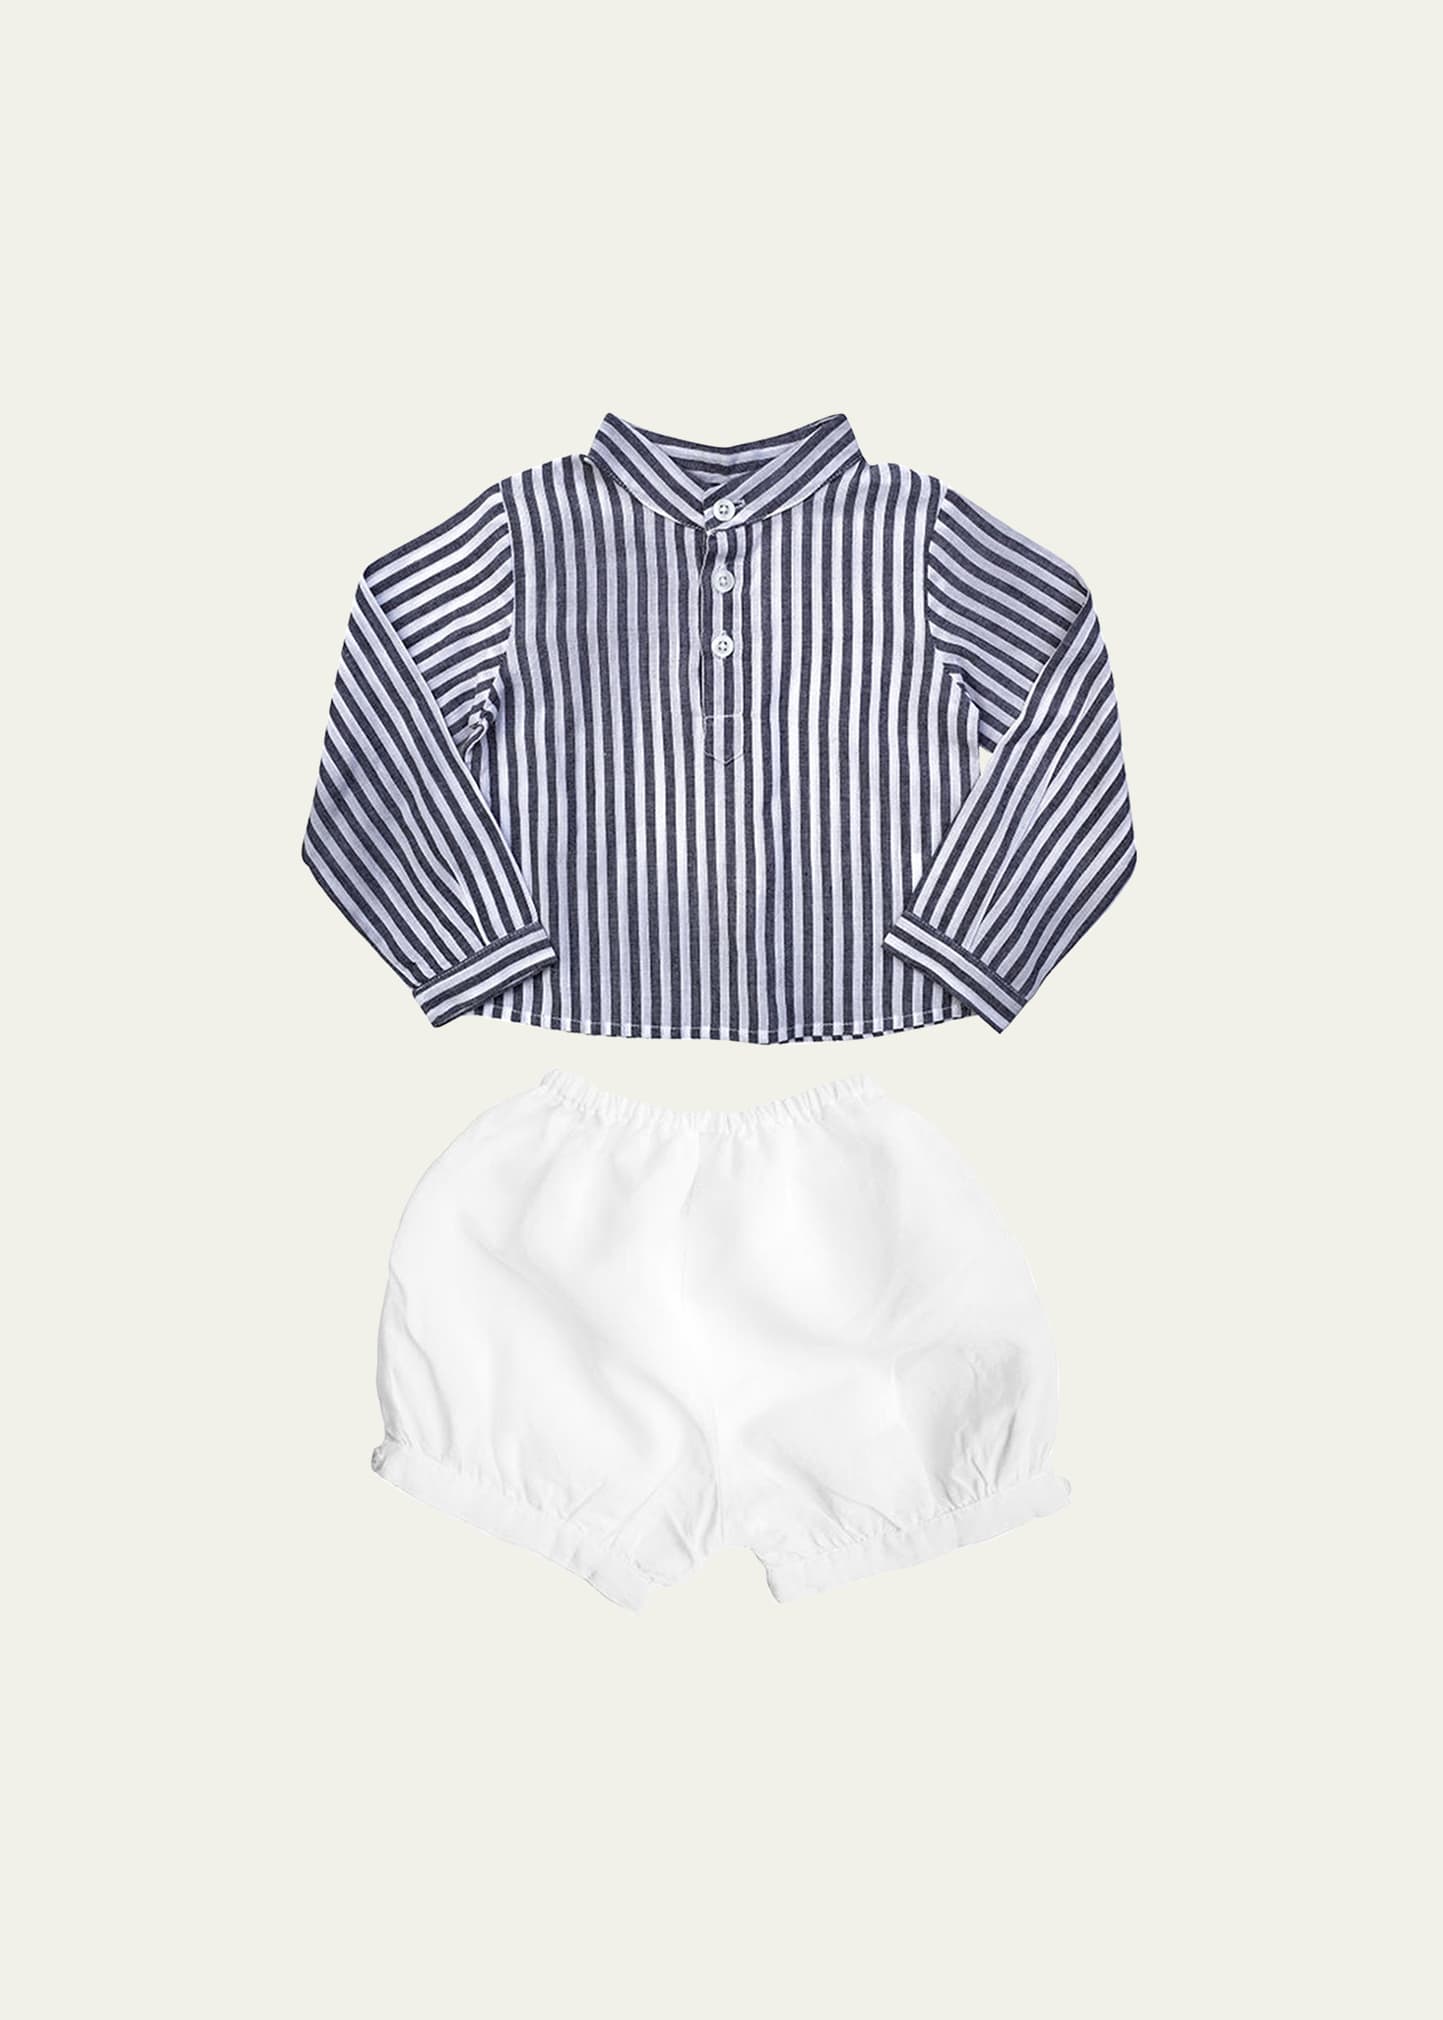 Louelle Boy's French Collar Shirt